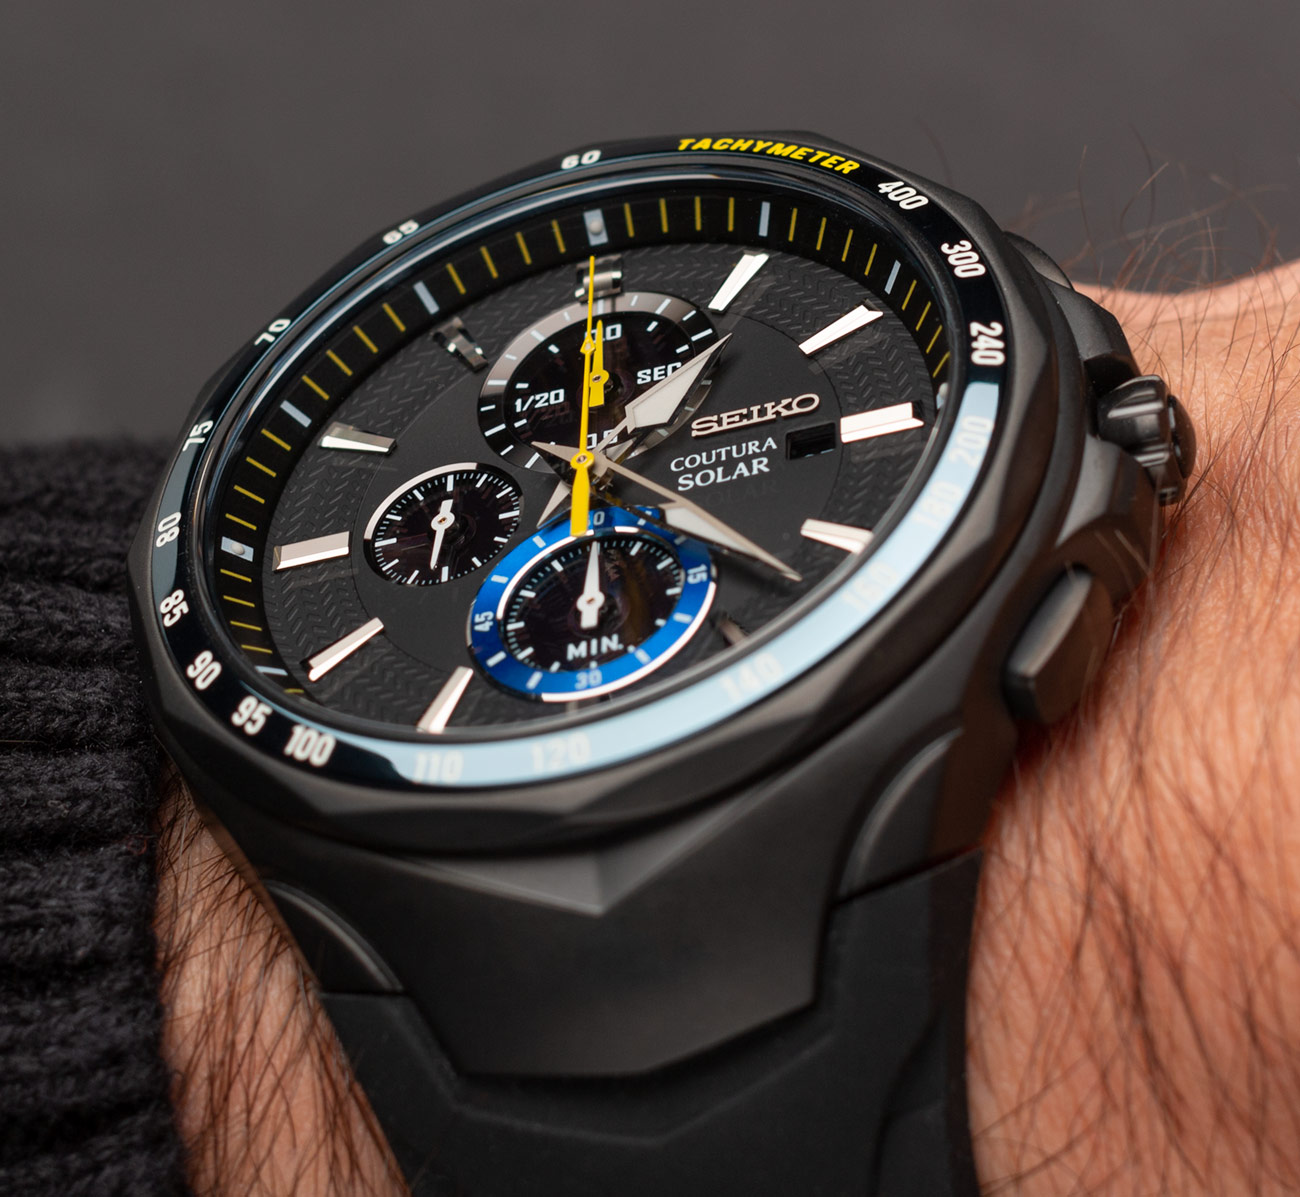 Seiko Coutura Solar Chronograph Jimmie Johnson Special Edition Watch  Hands-On | aBlogtoWatch